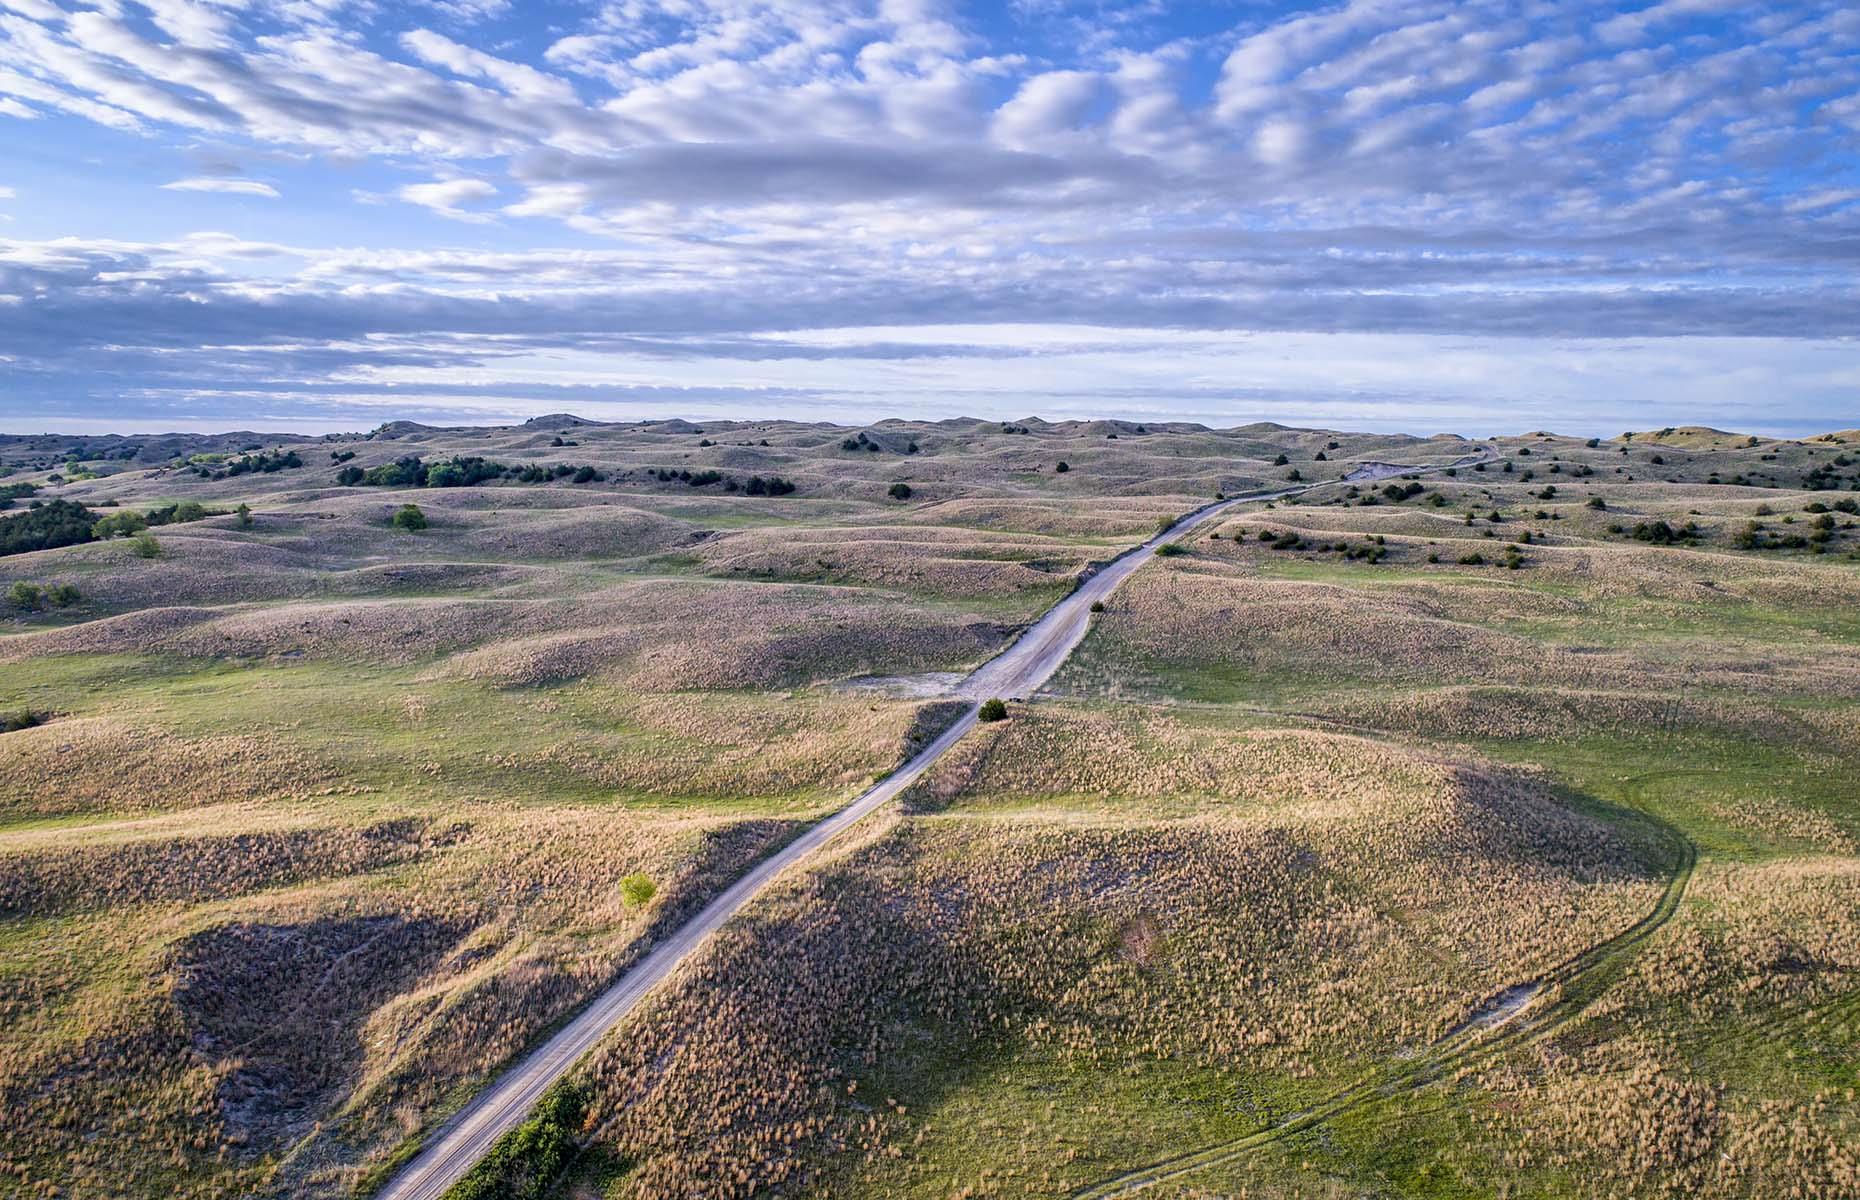 <p>A rural route traversing 272 miles (438km) of sand dunes, plains and the Nebraska National Forest, <a href="https://visitnebraska.com/sandhills-journey-scenic-byway">this scenic byway</a> is the perfect place to spot some of the millions of birds who cross the North American Central Flyway (it's especially scenic in spring when migrating sandhill cranes fill the skies). Those who stay the night in these parts will be rewarded with some of the best stargazing in the world.</p>  <p><a href="https://www.loveexploring.com/galleries/89998/americas-best-spots-for-stargazing?page=1"><strong>Here are more of America's best spots for stargazing</strong></a></p>